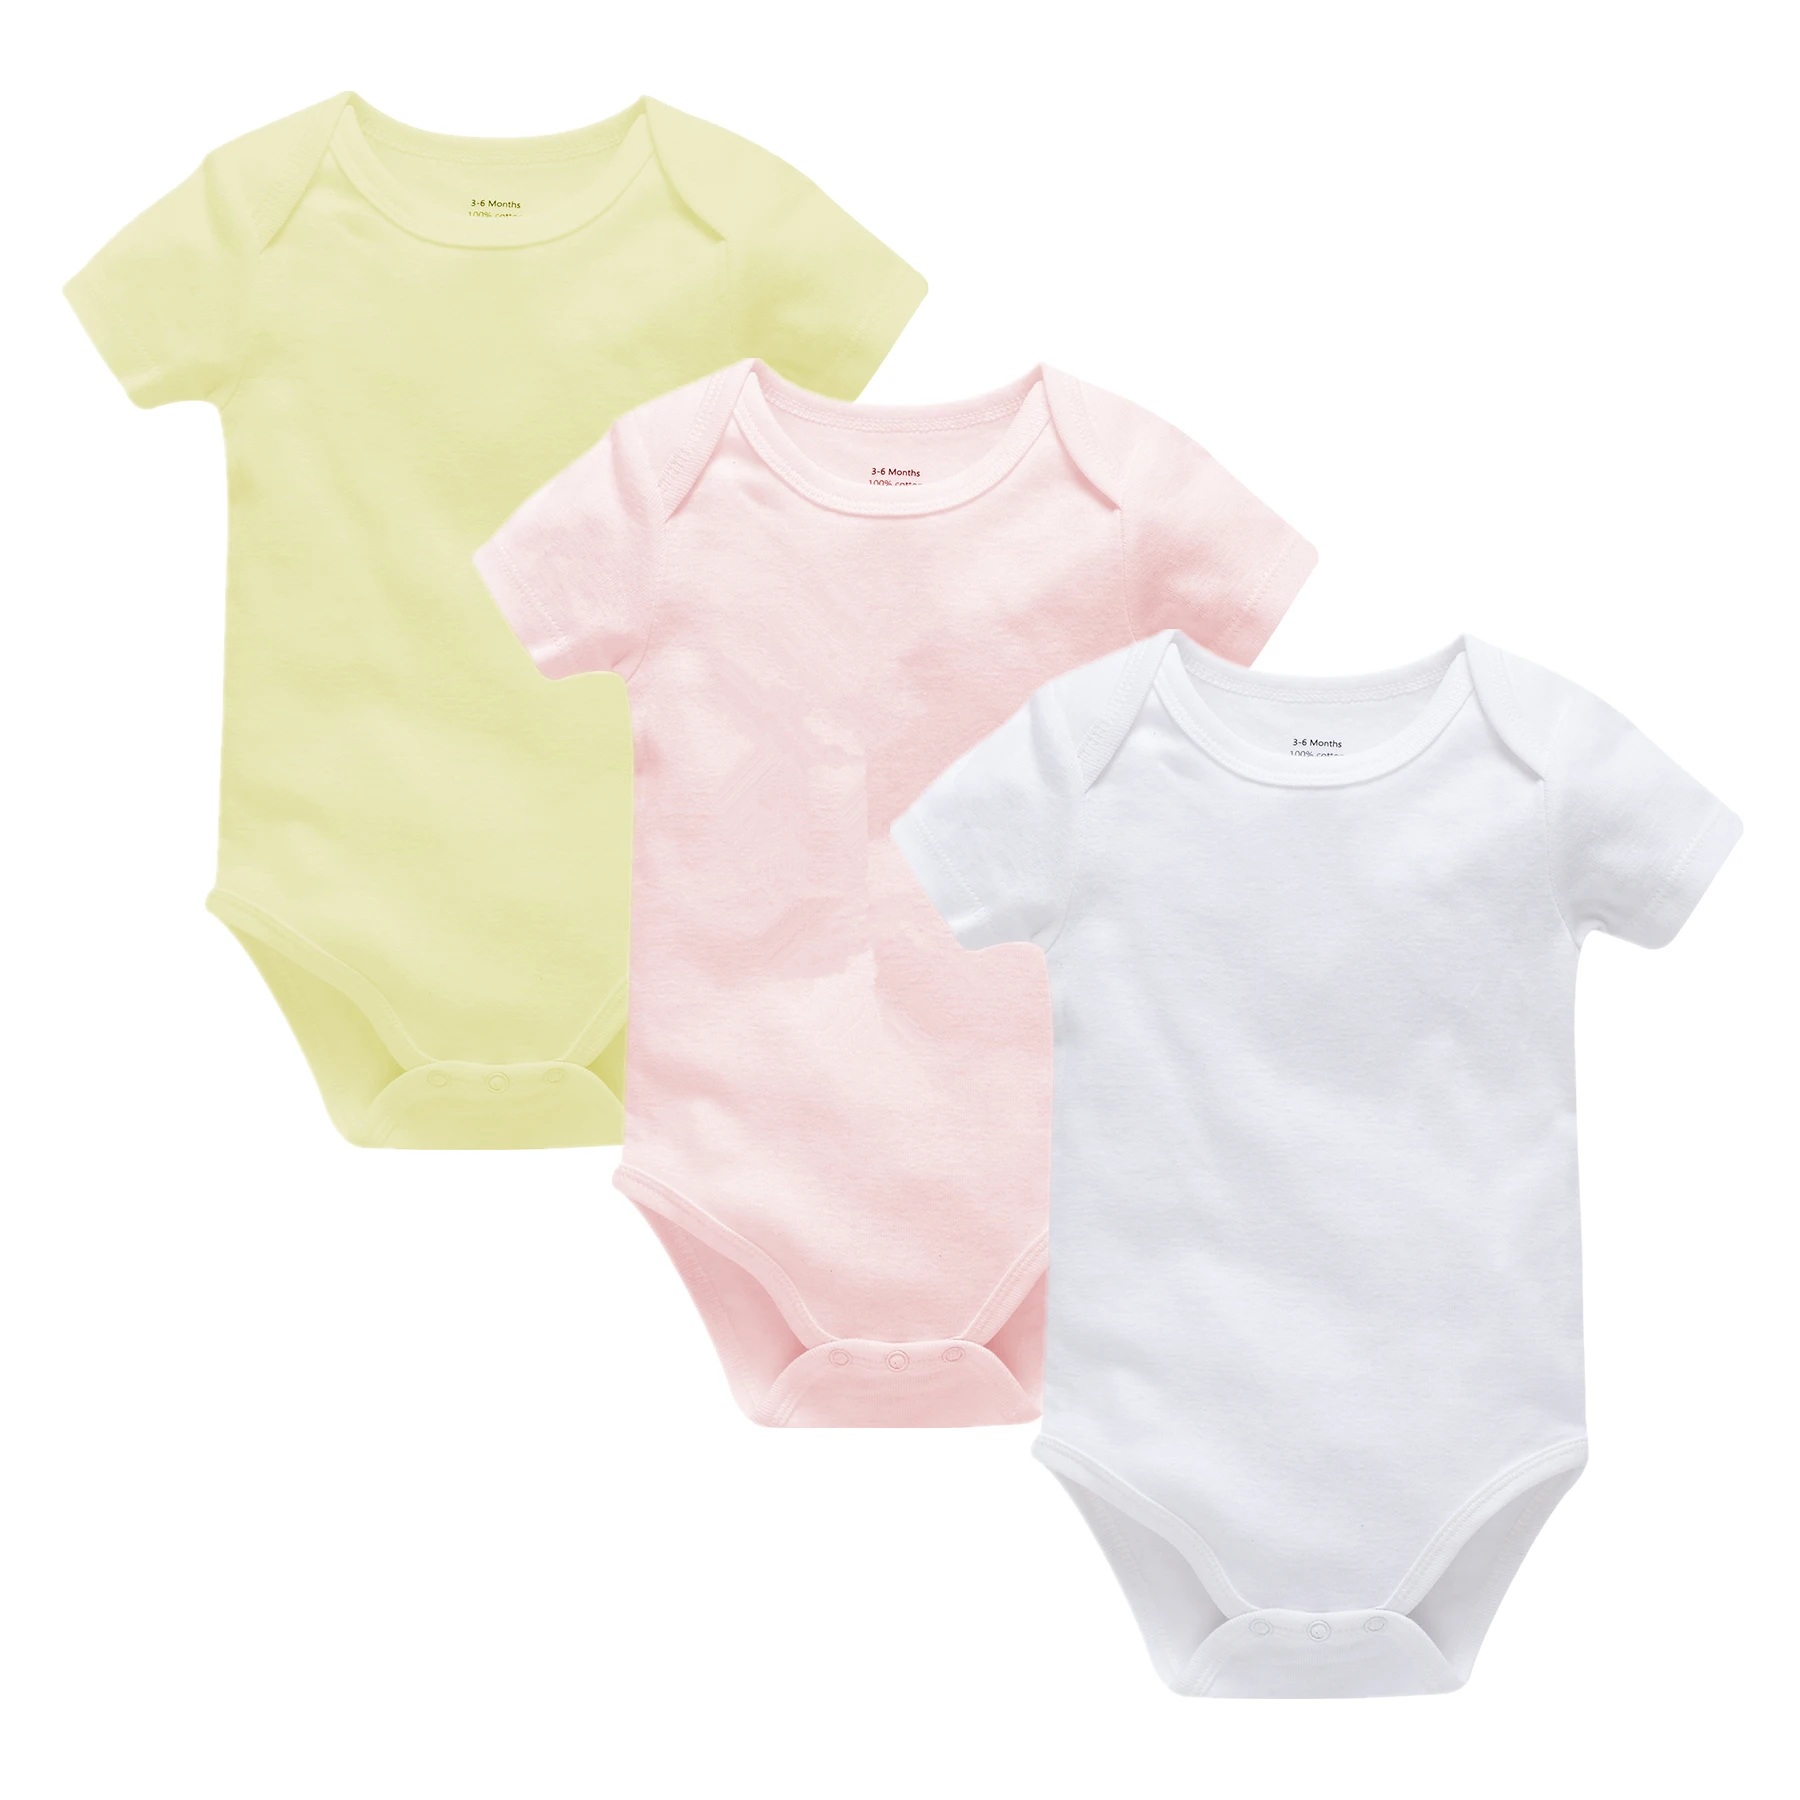 

Roupas Bebe De 100% Cotton Toddler Baby Girls Rompers Outfits Jumpsuit 0-24M Pure Color Short Sleeve Newborn Baby Boy Onesies